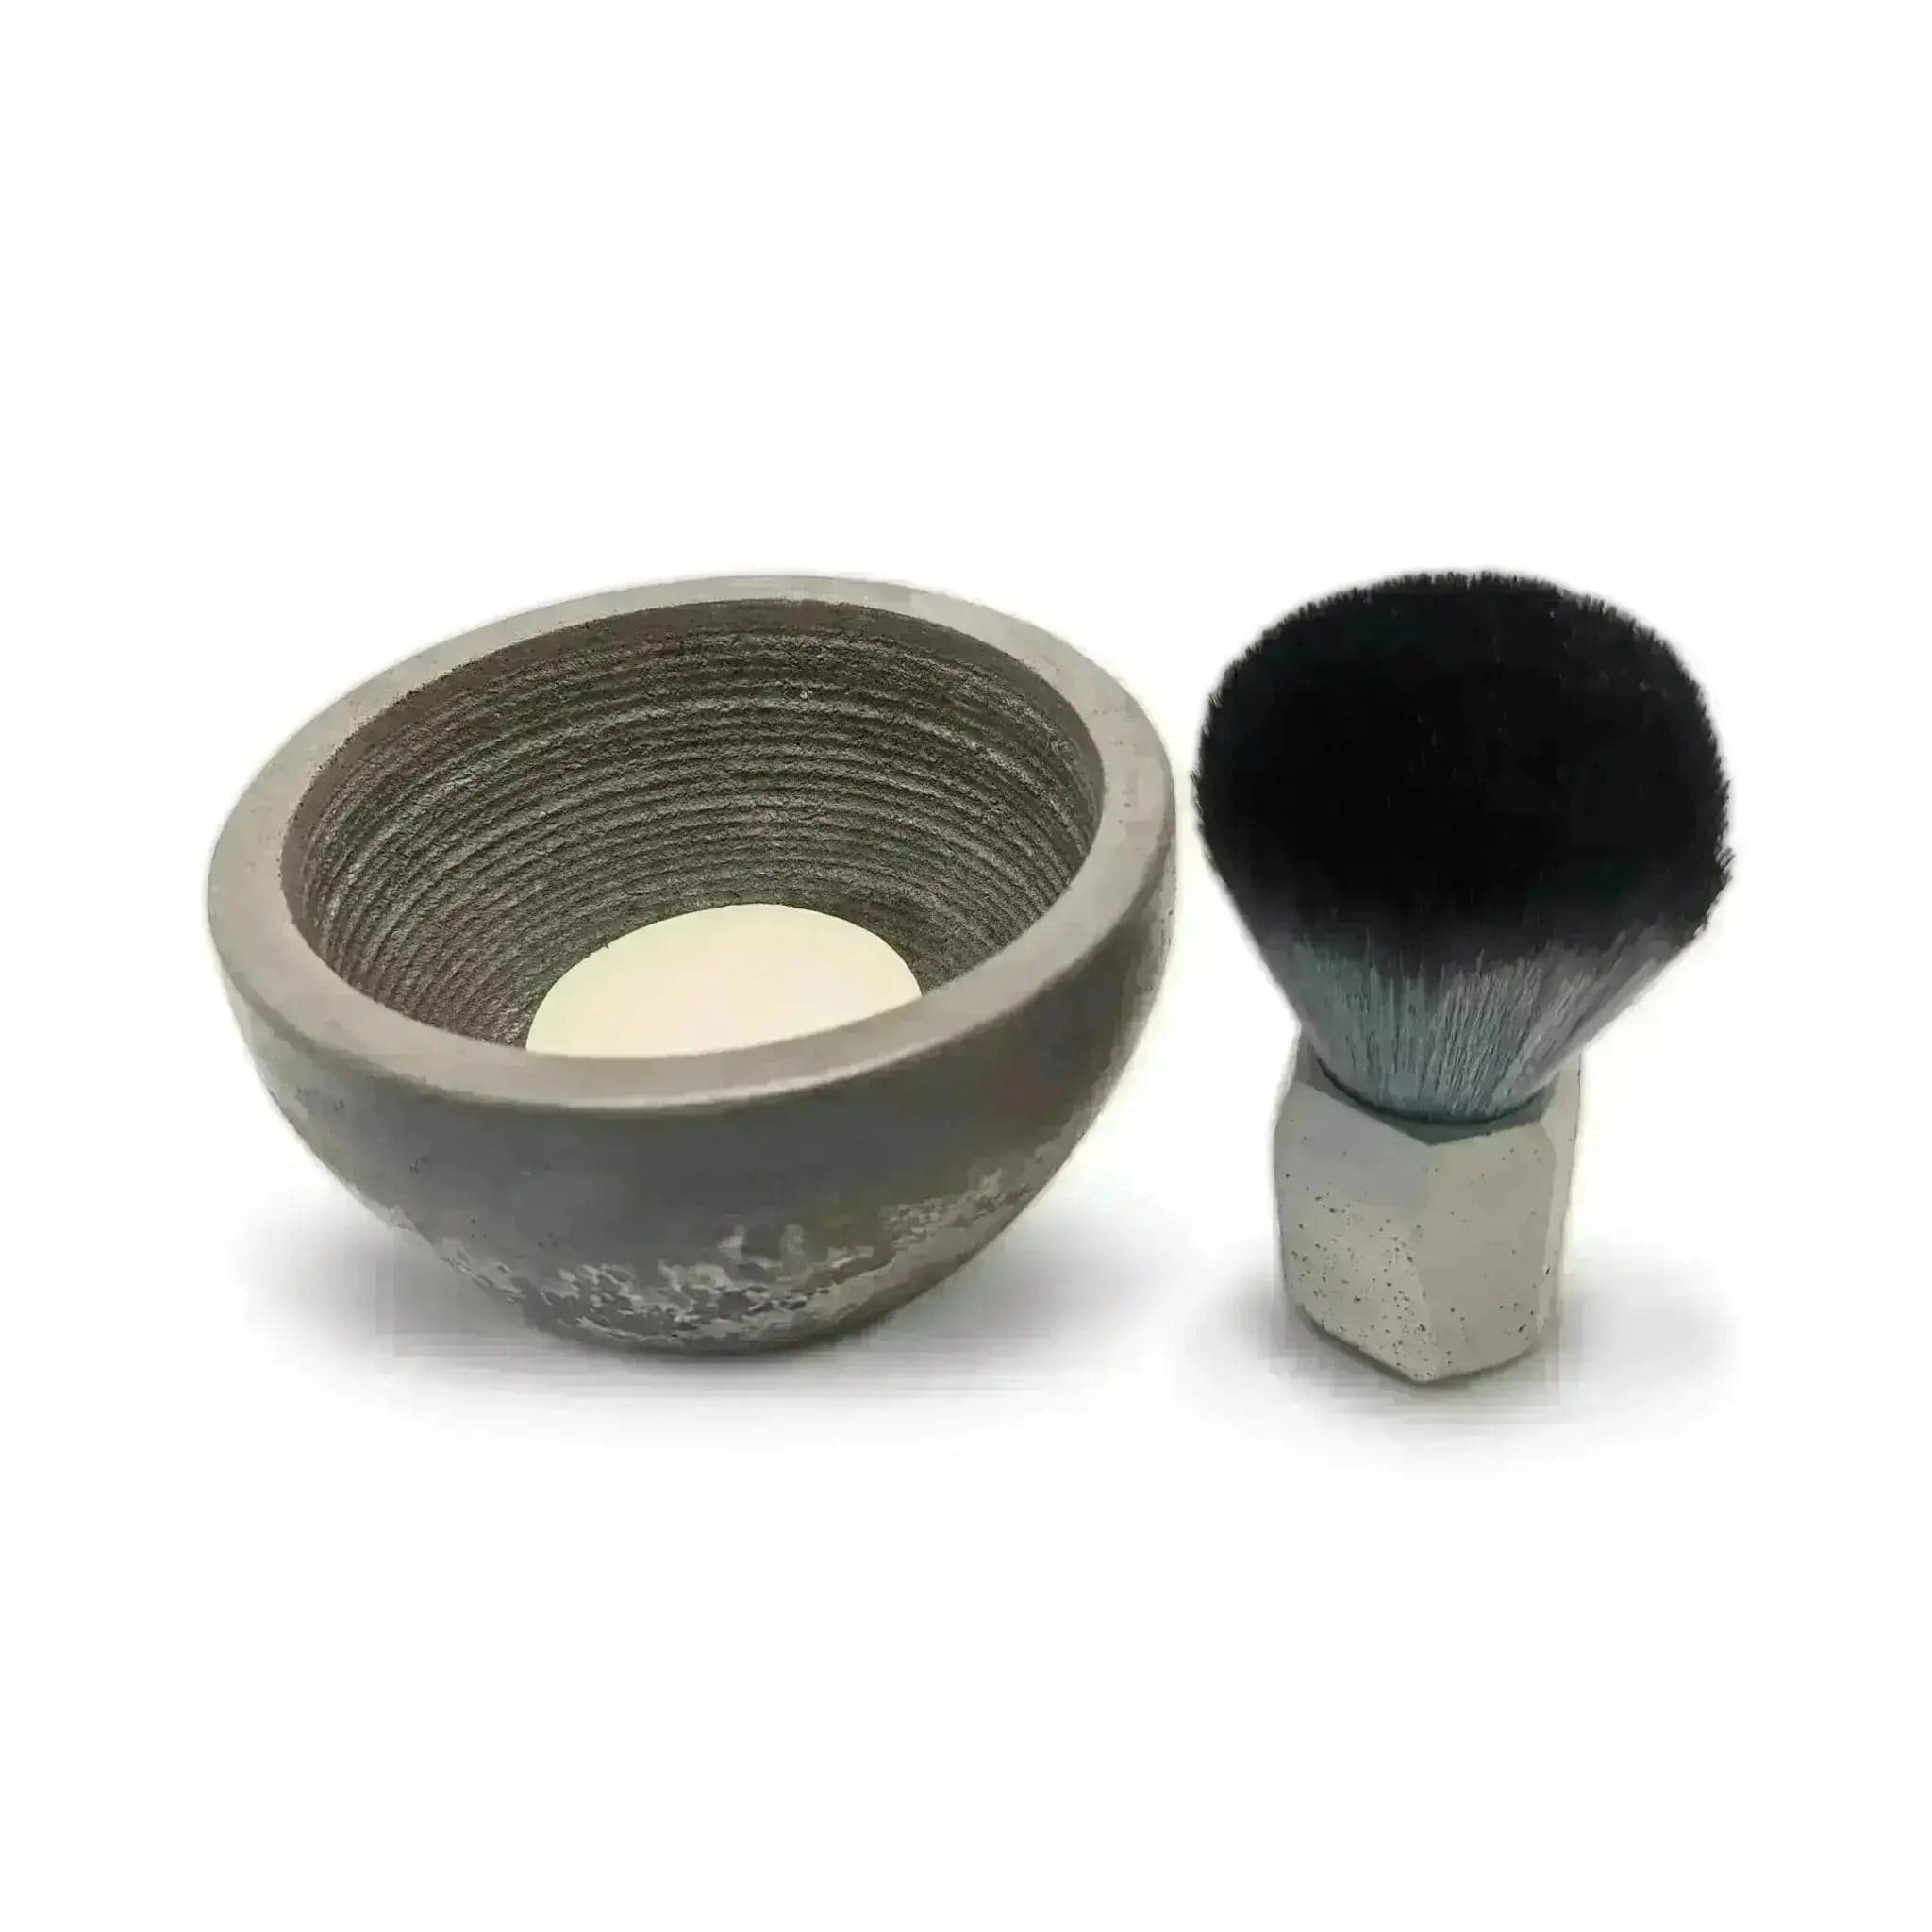 a shaving brush and bowl on a white background